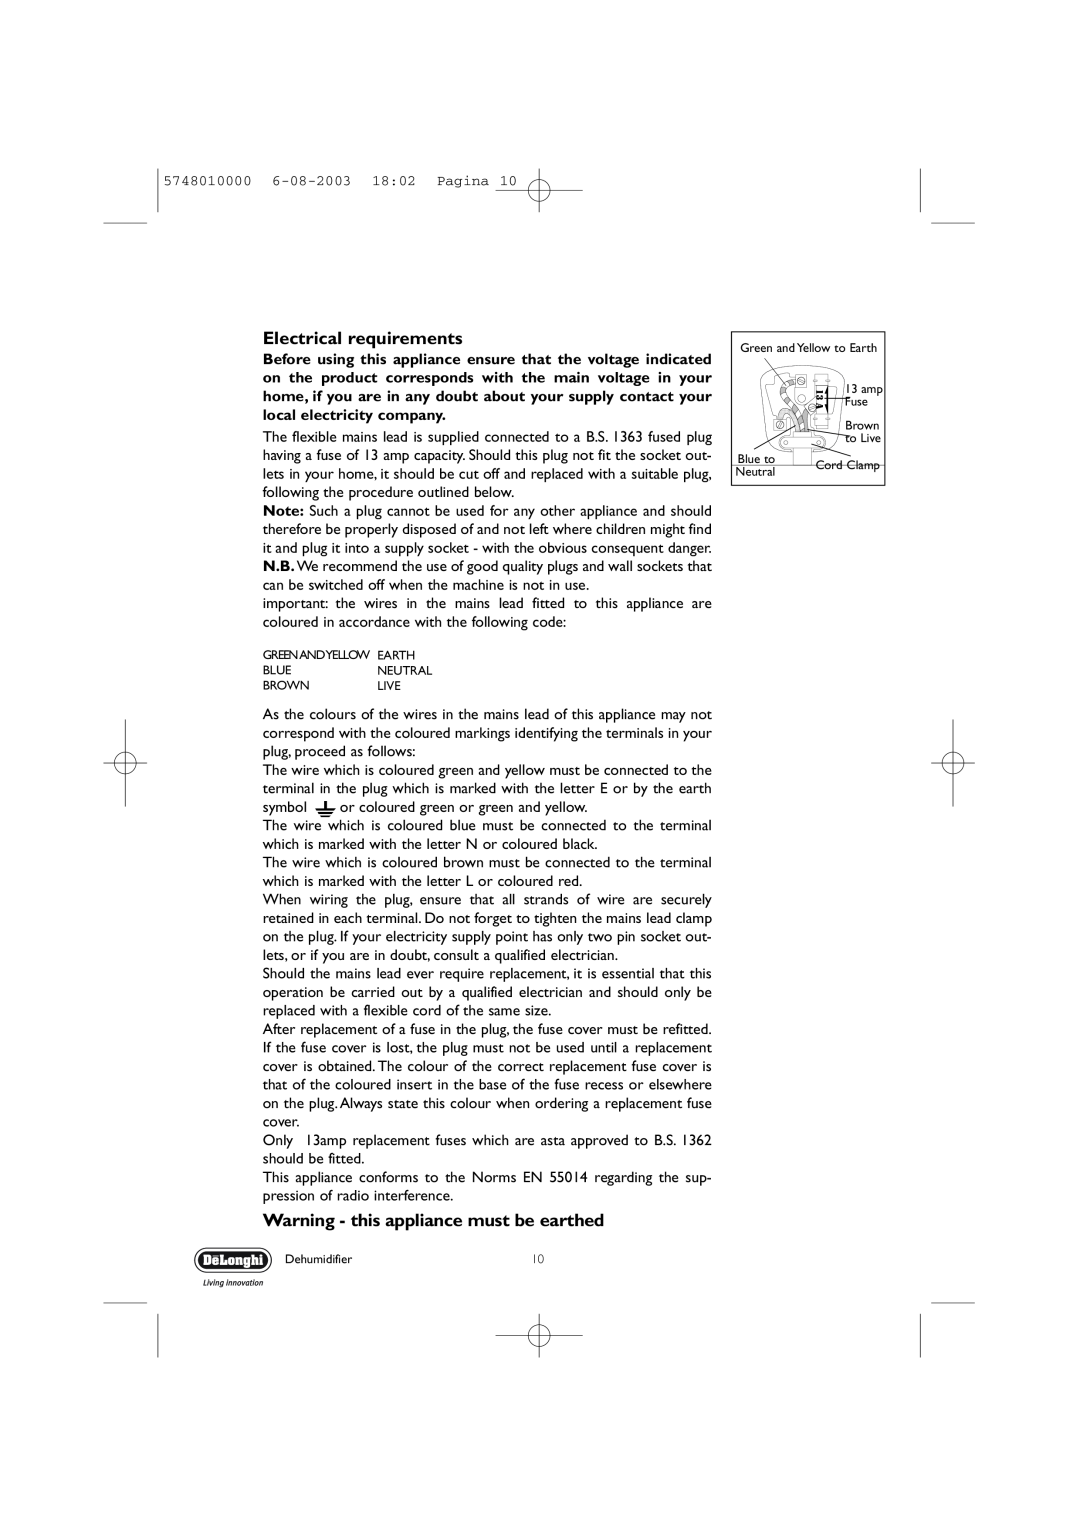 DeLonghi DEC 21 manual Electrical requirements, Warning - this appliance must be earthed 